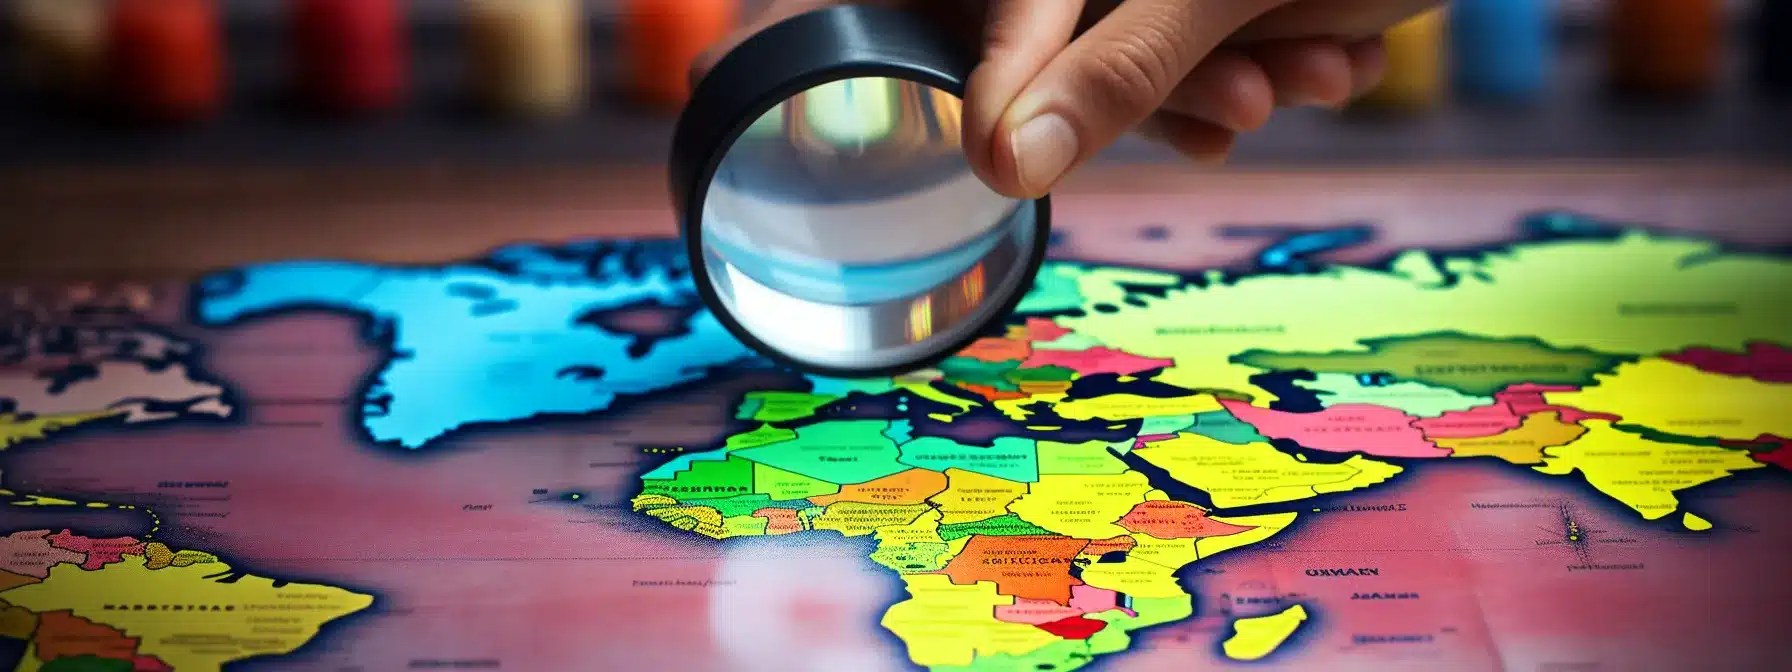 A Person Holding A Magnifying Glass Over A Map With Colorful Spray Can Markings.